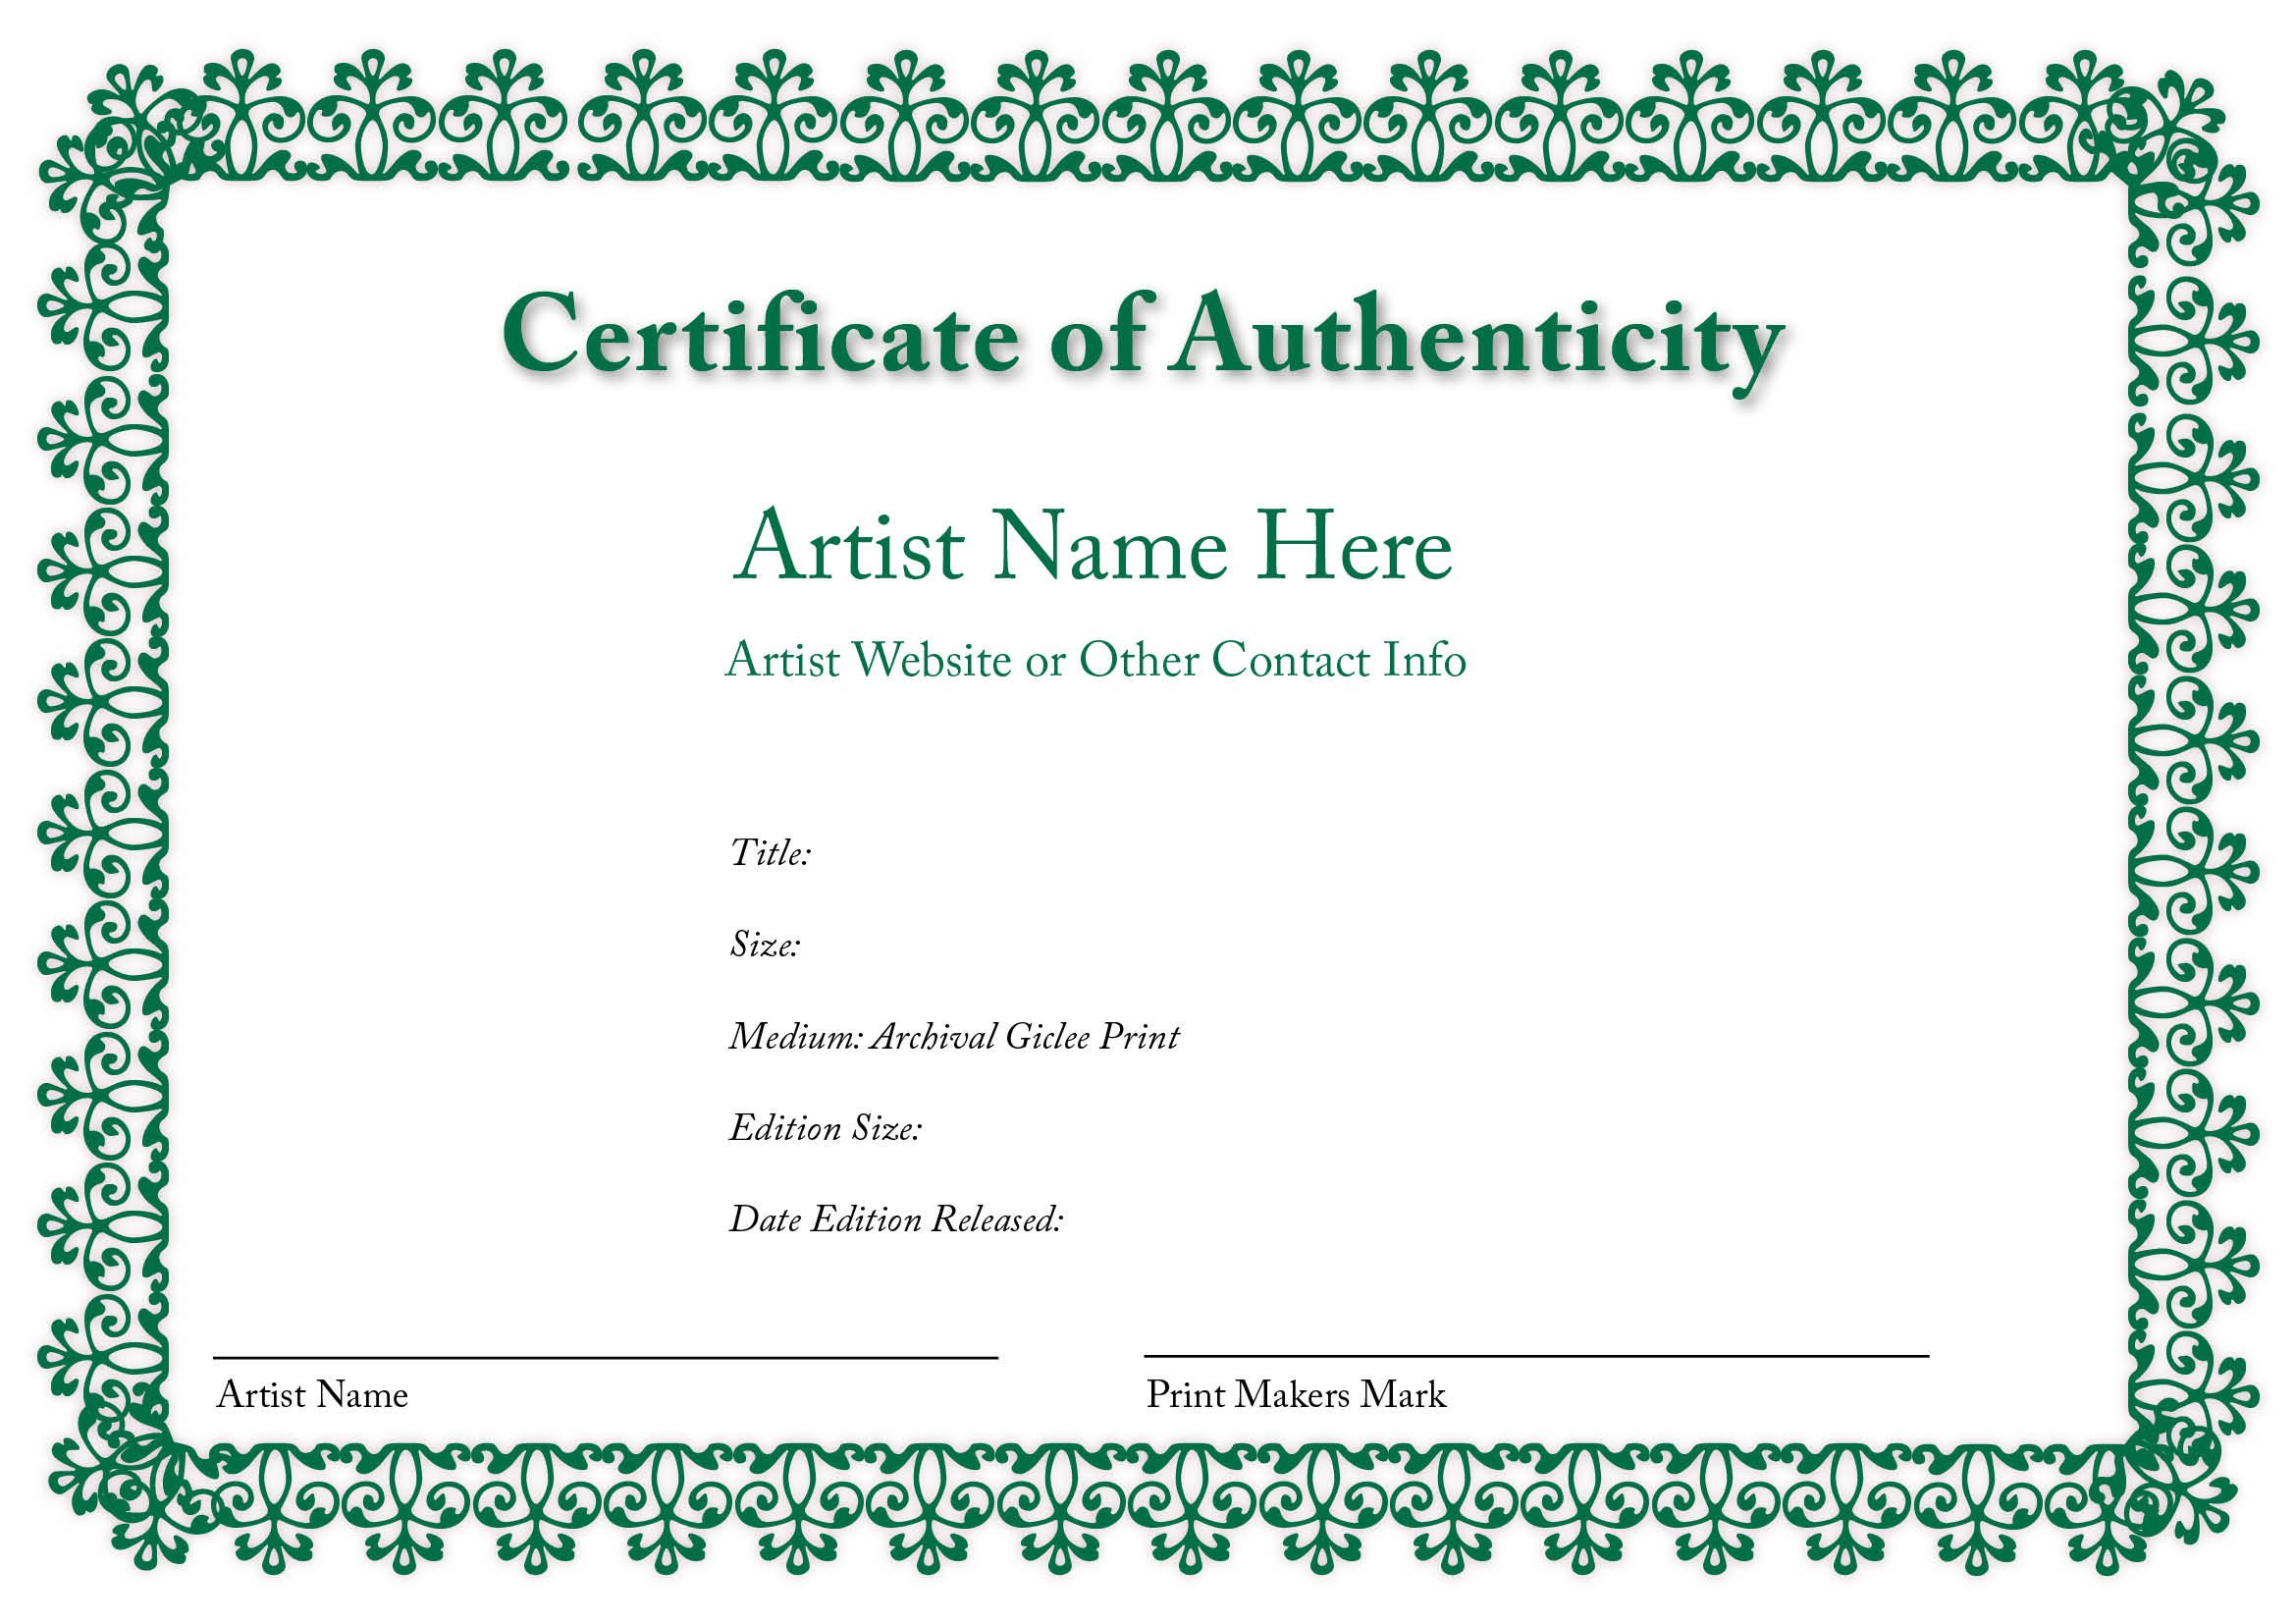 Blank certificates of authenticity